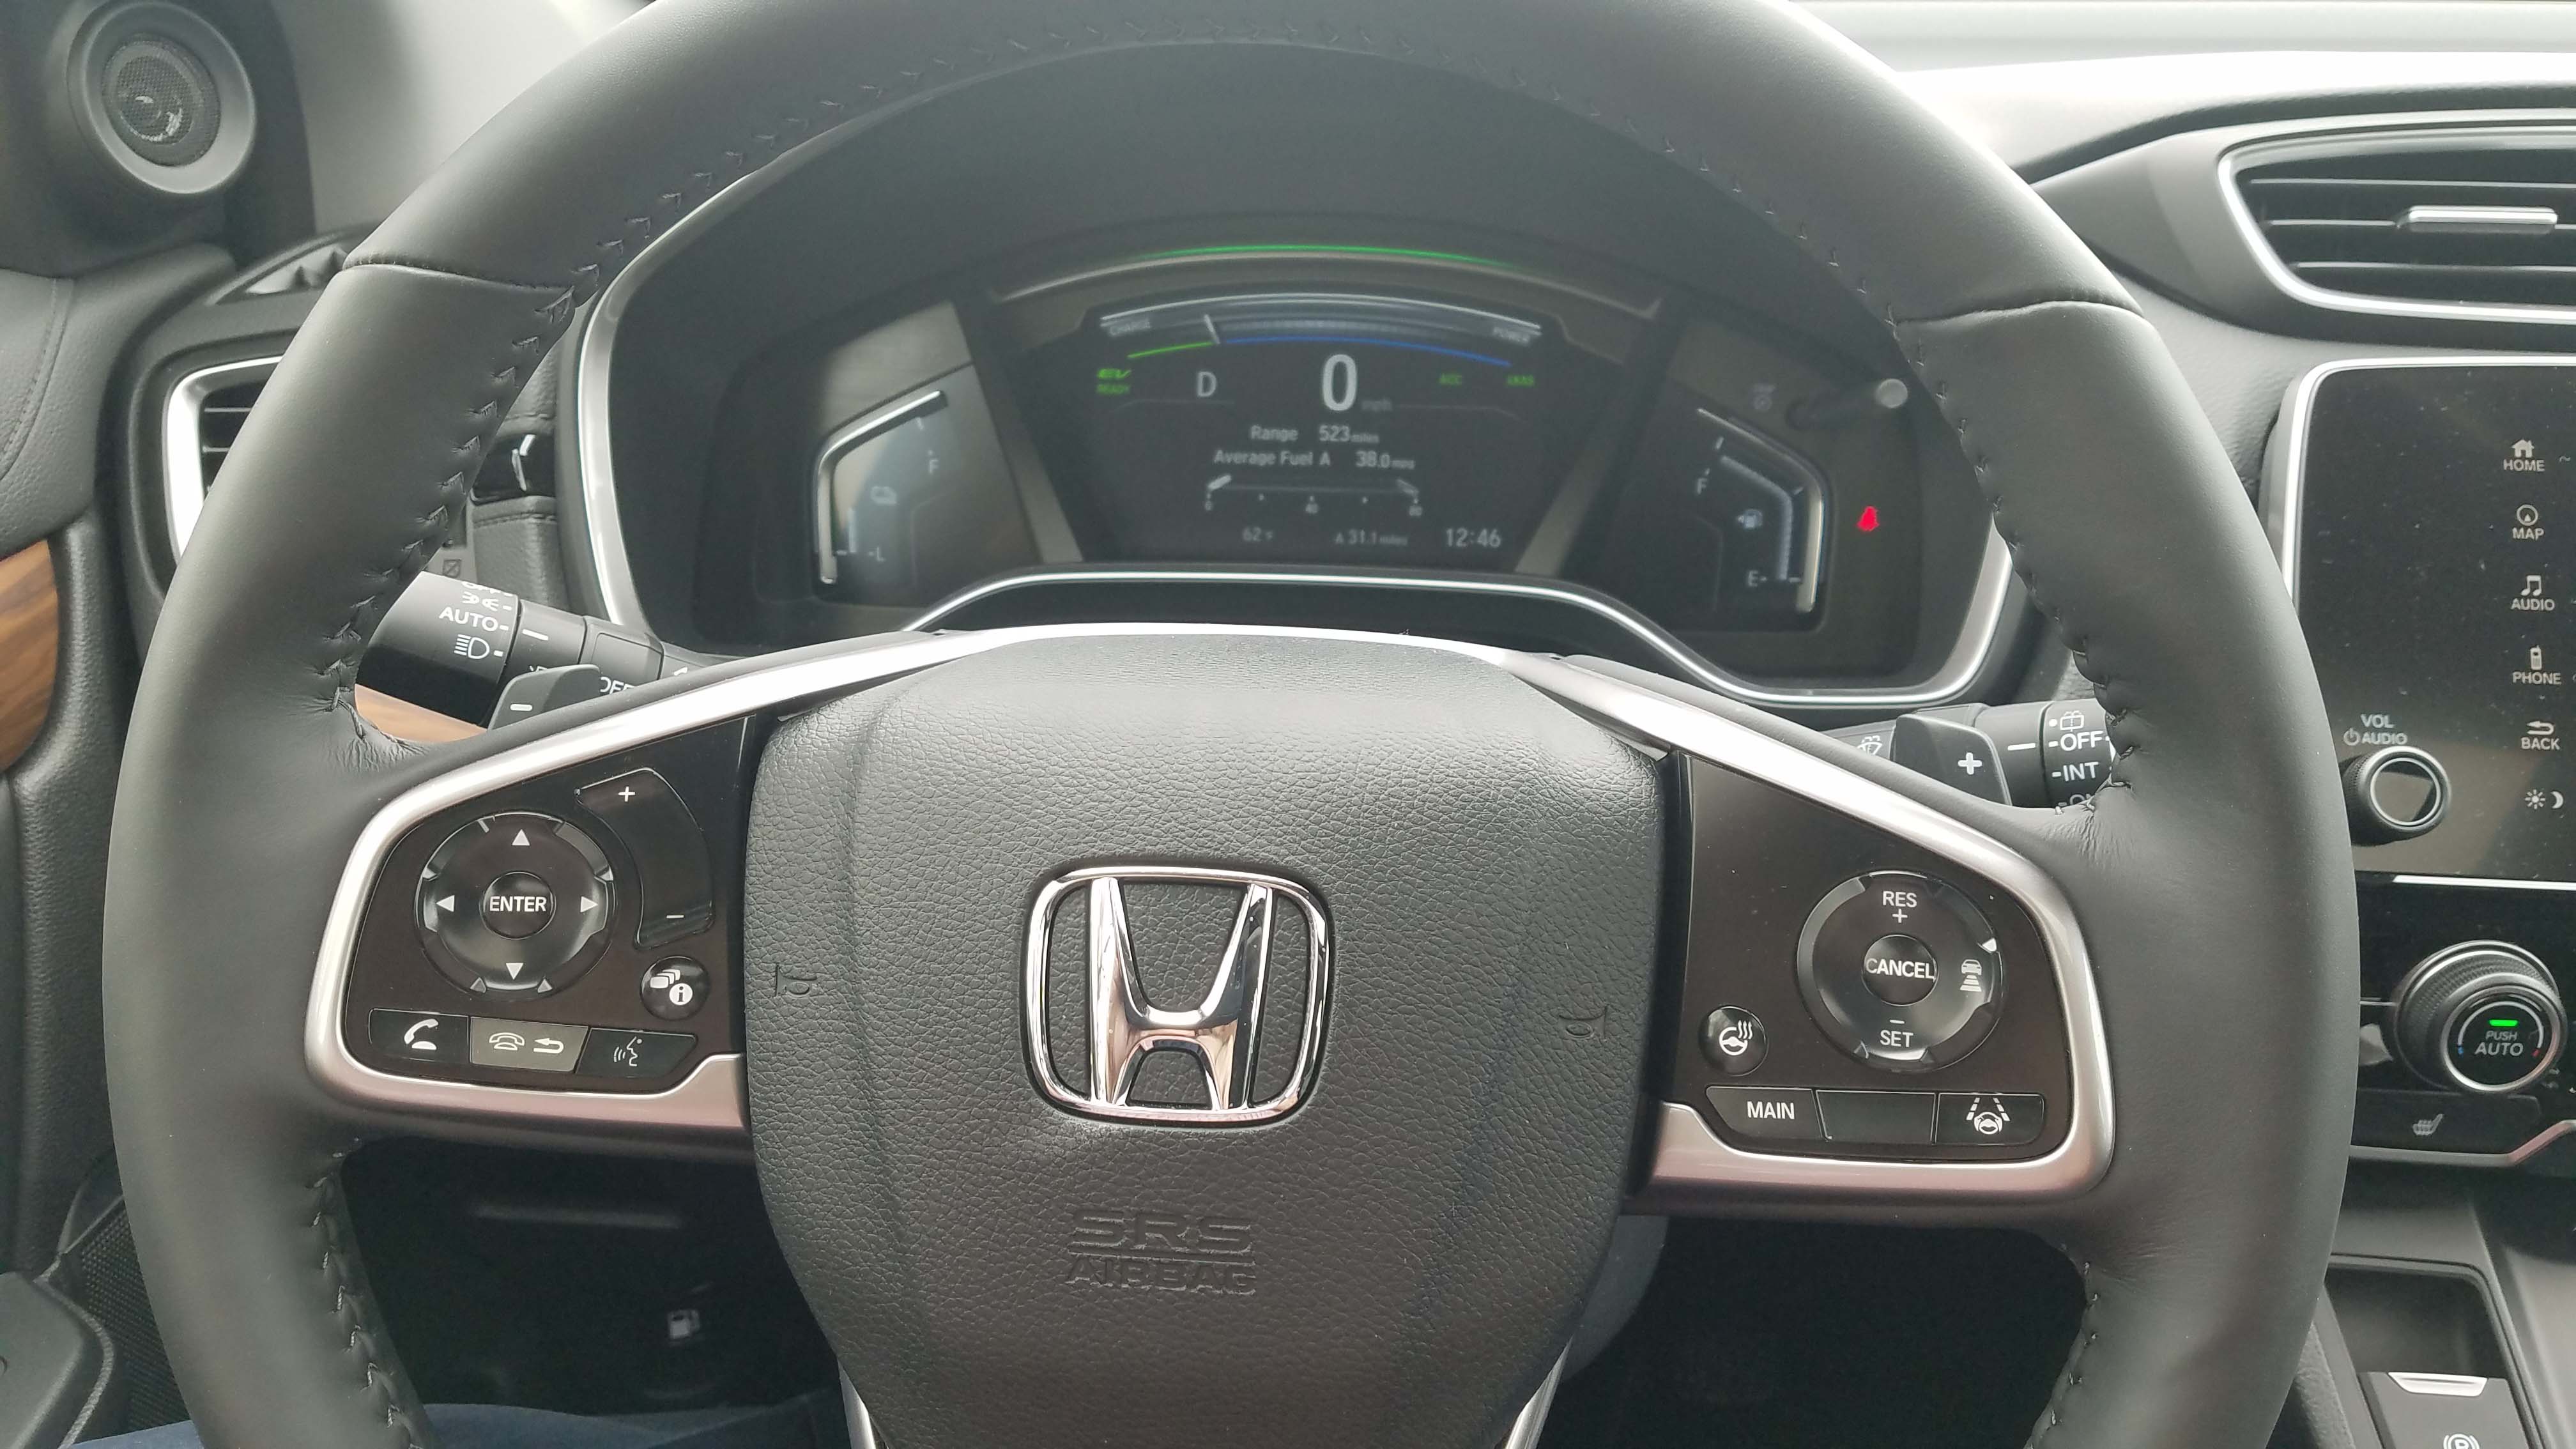 Standard goodies. The 2020 Honda CR-V Hybrid boasts a digital dash and standard adaptive cruise control controlled from the steering wheel.